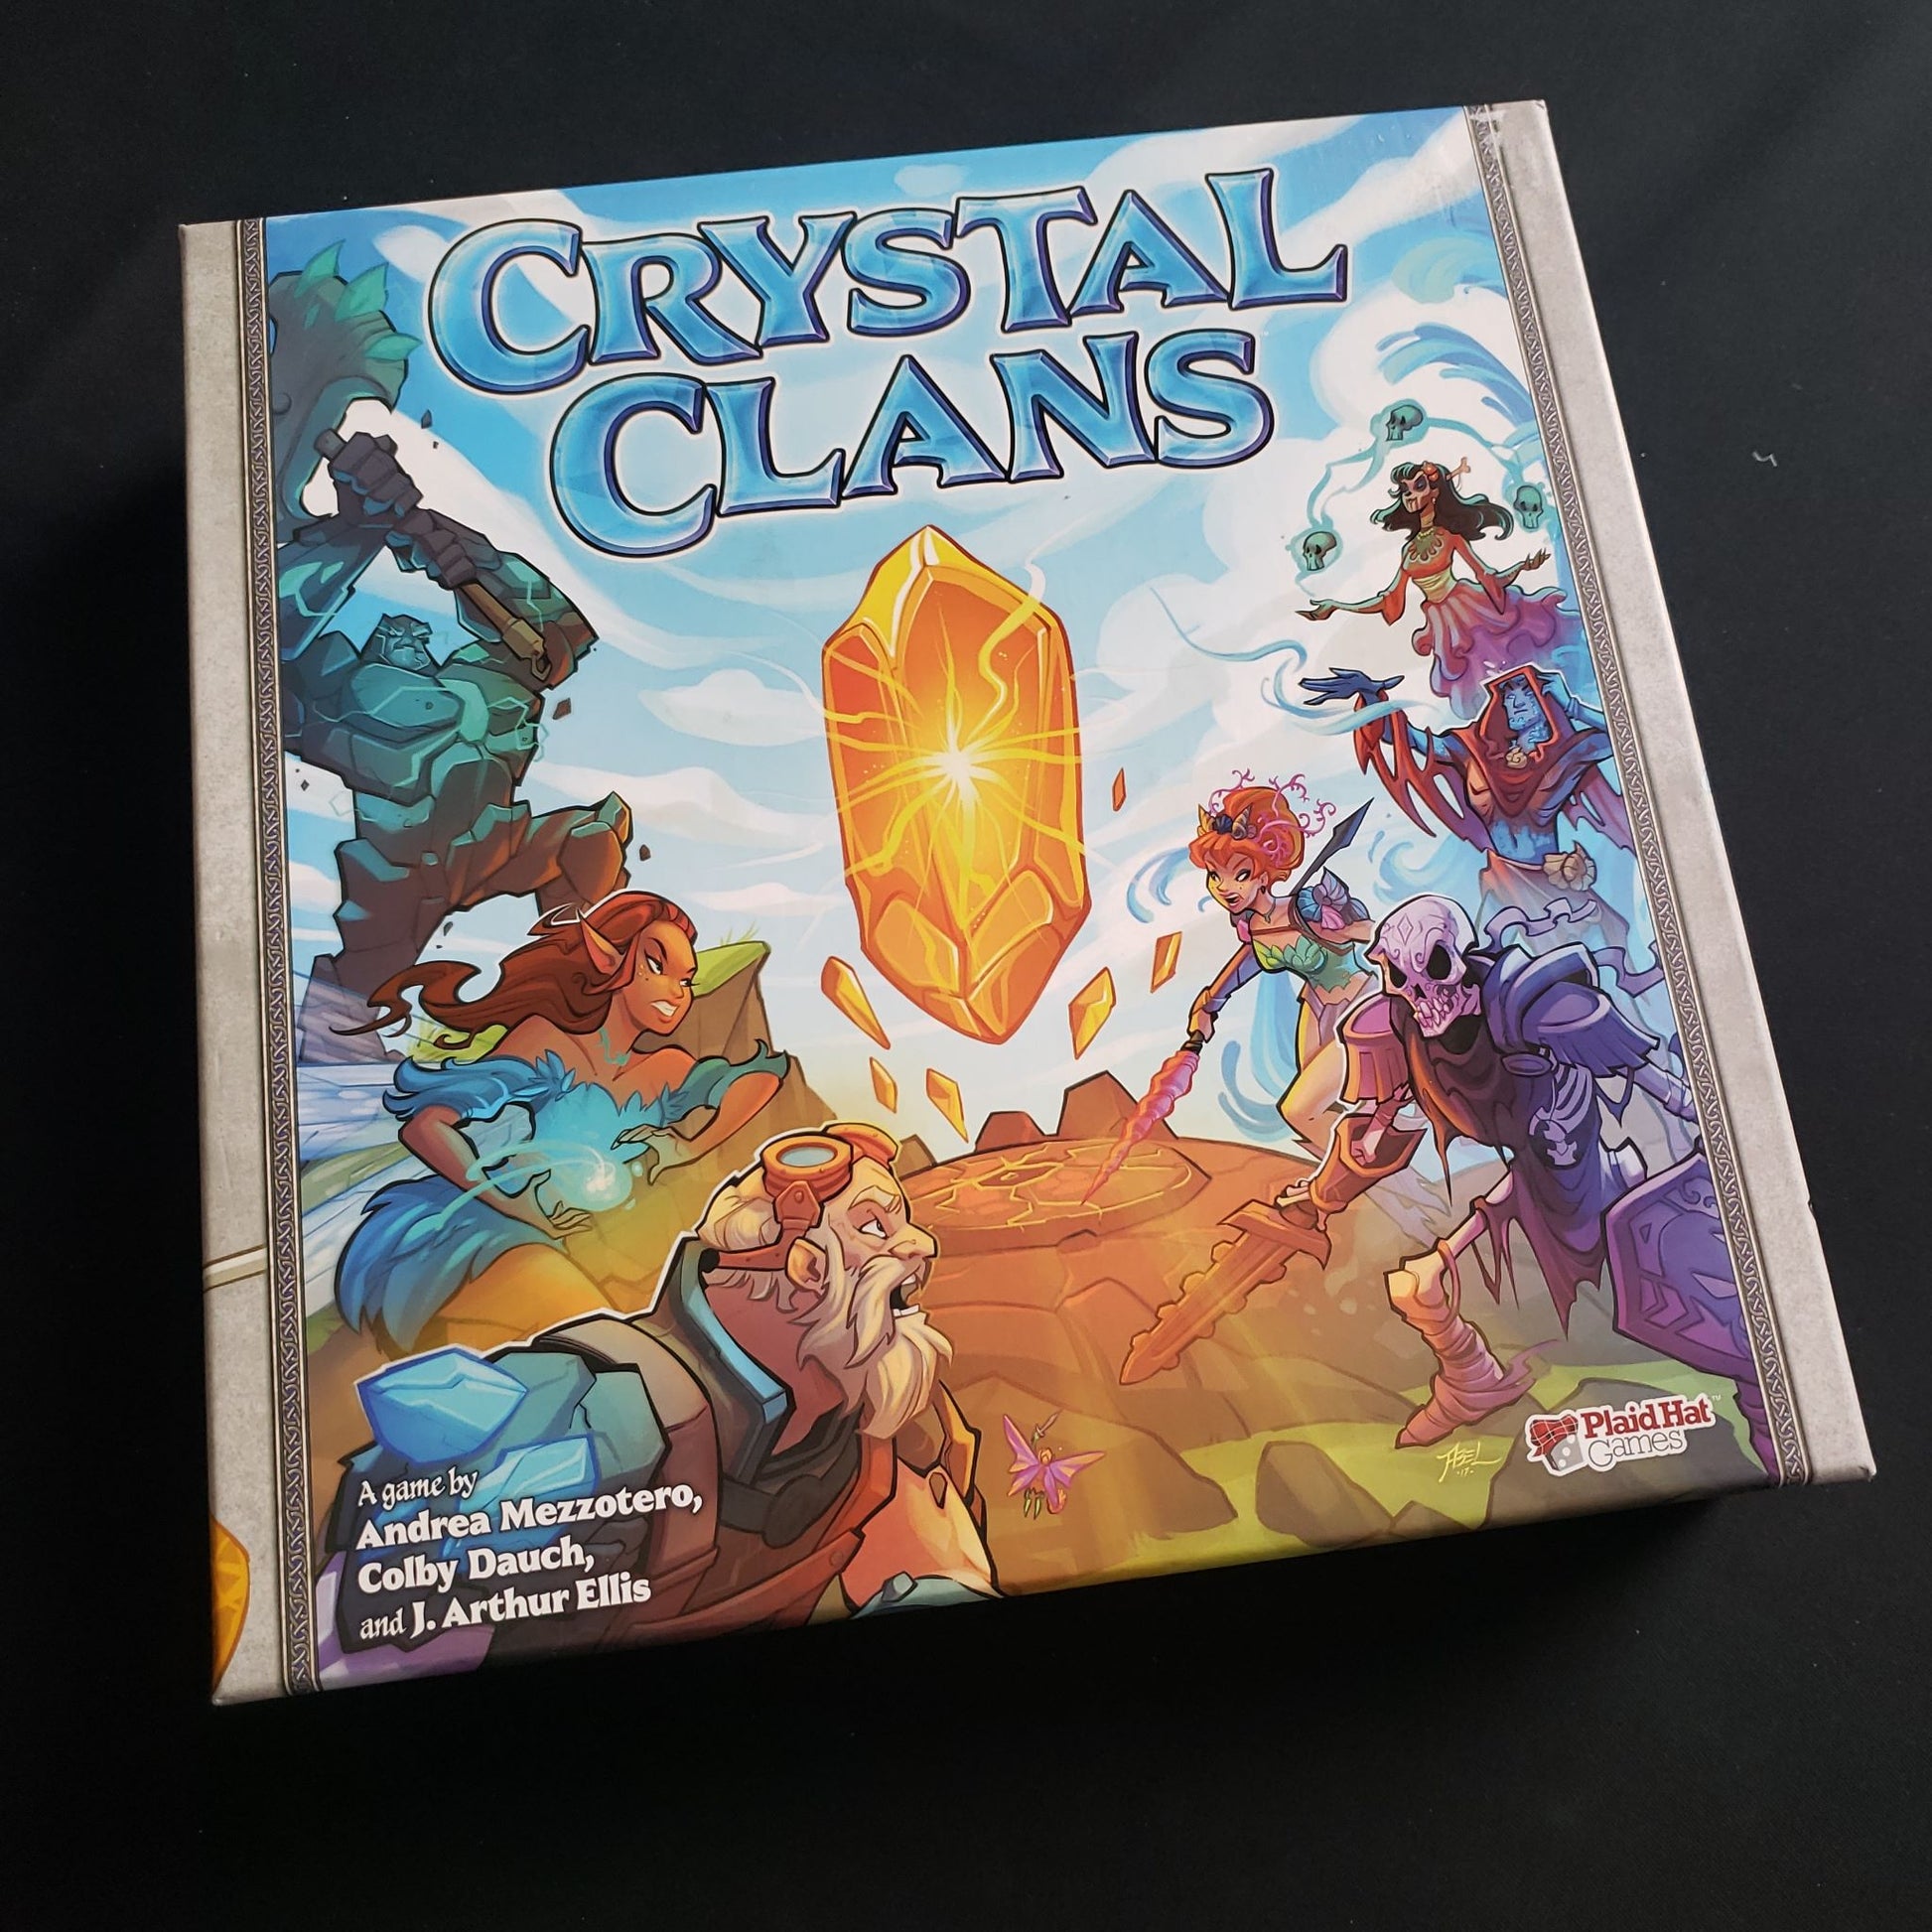 Crystal Clans card game - front cover of box